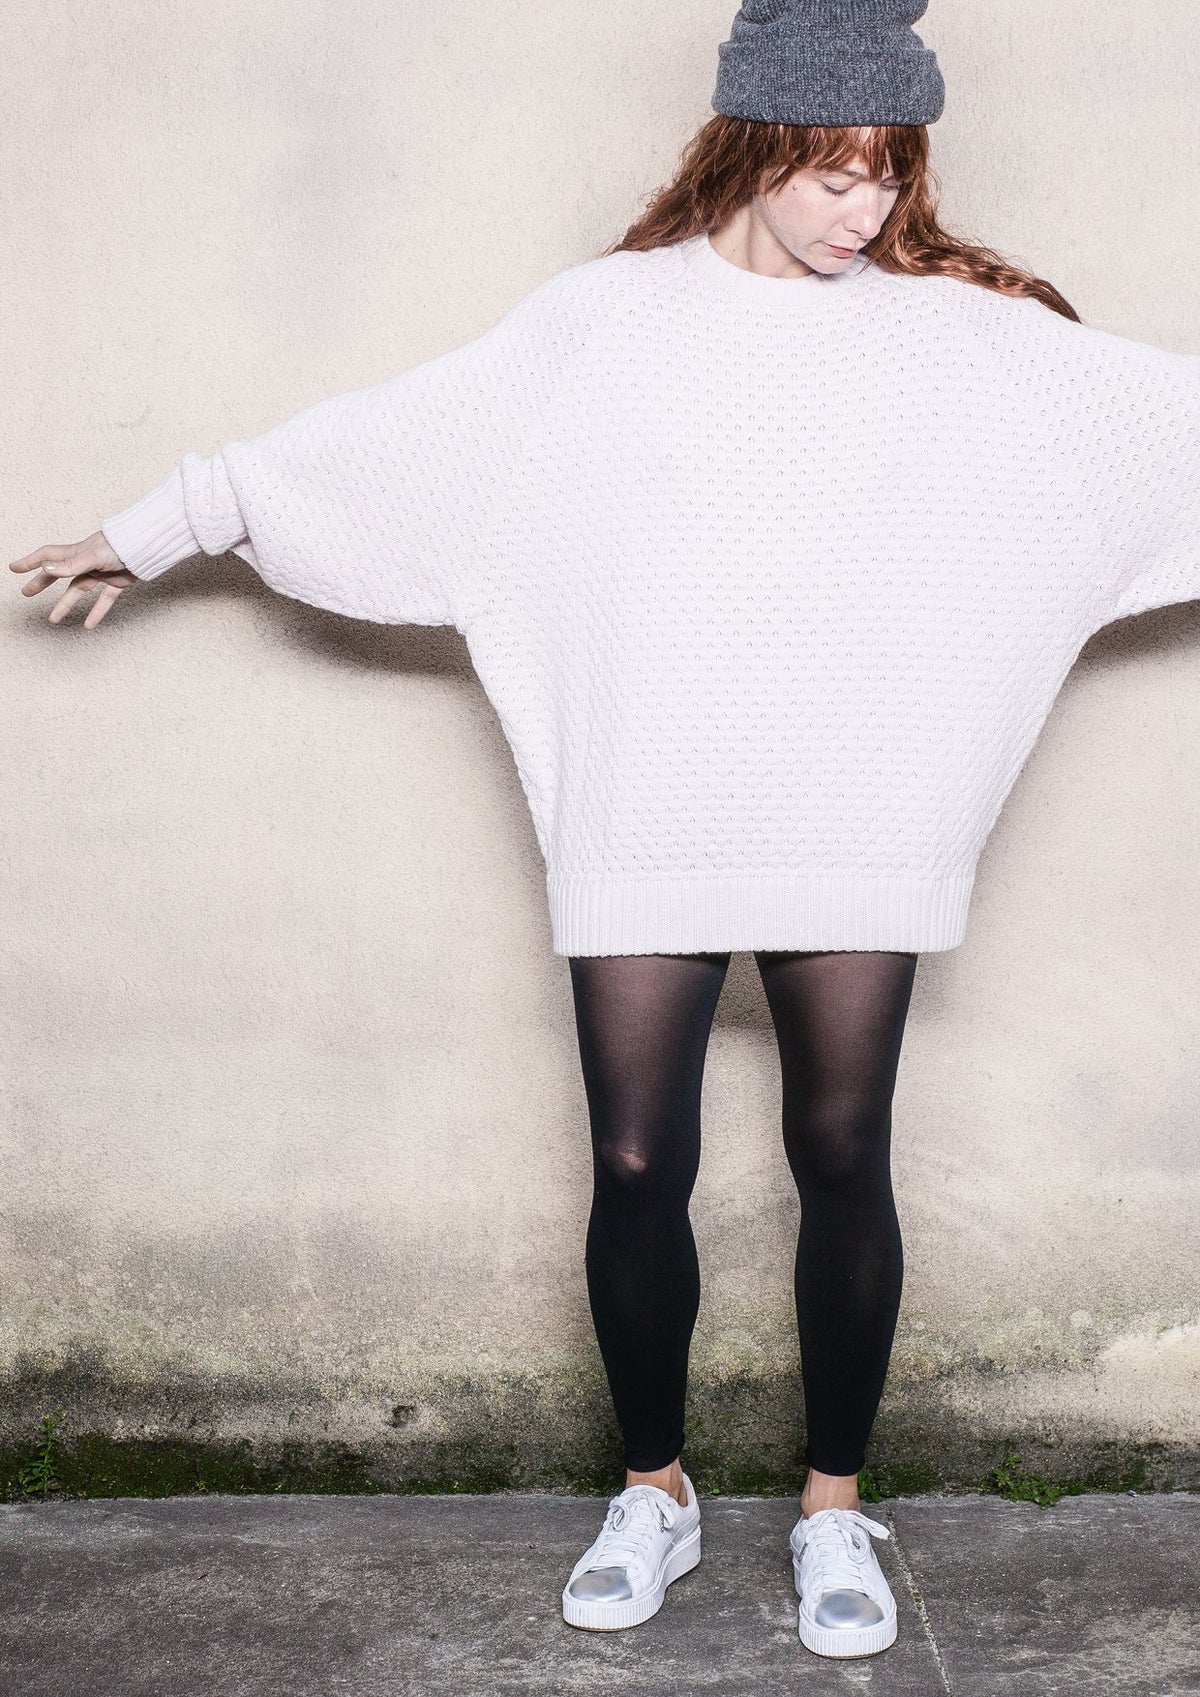 SWEATER OVERSIZE - KNIT PEARL ivory by BERENIK